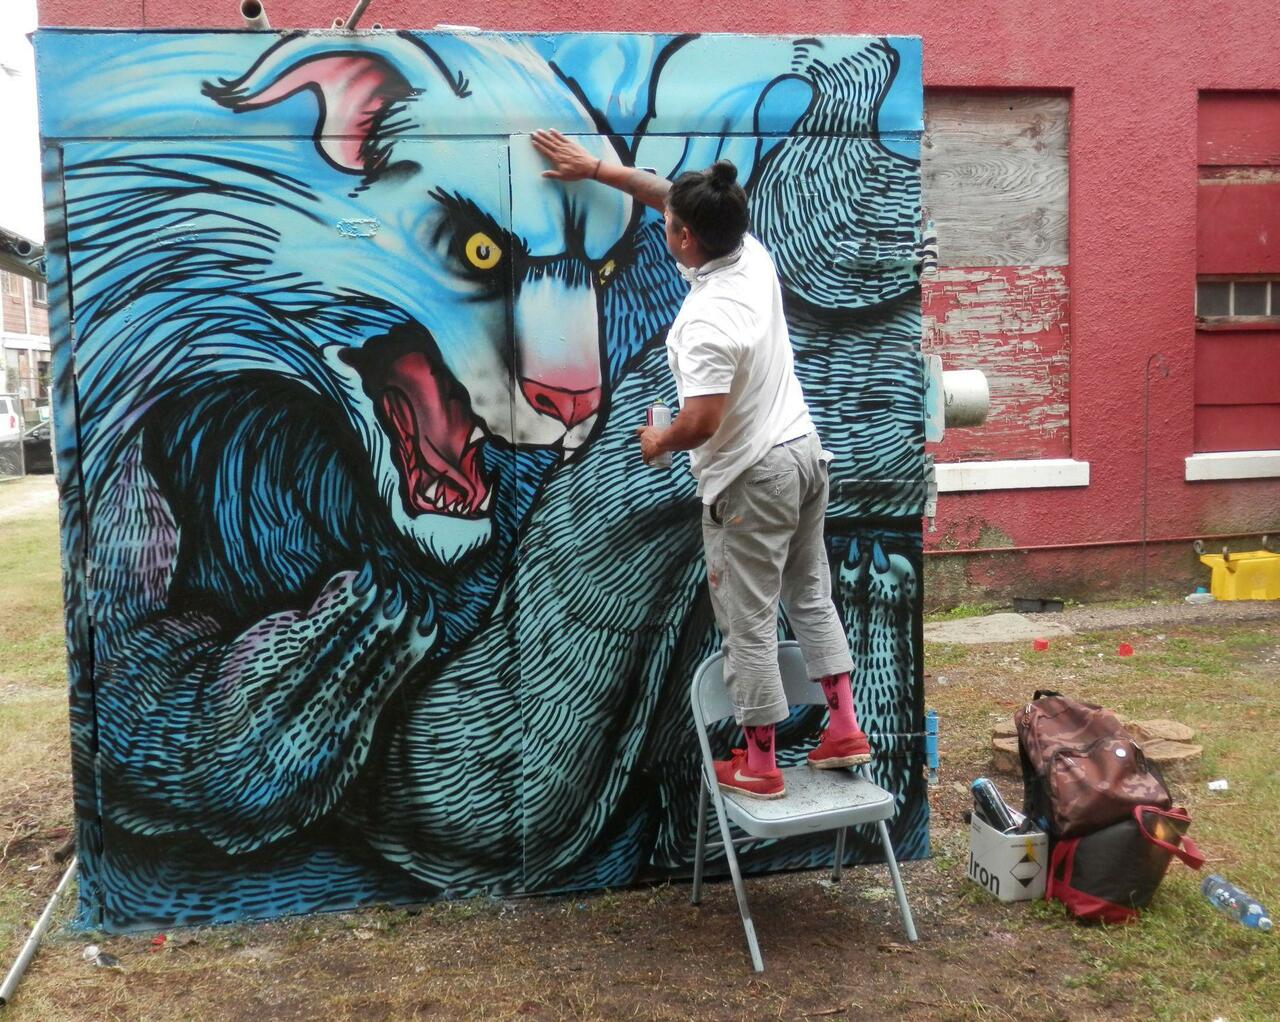 RT @JohnRMoffitt: #Houston #Graffiti #Streetart Black Cassidy uses the doors of an iron storage shed in the back yard as his canvas. http://t.co/dMQhcGTzpv